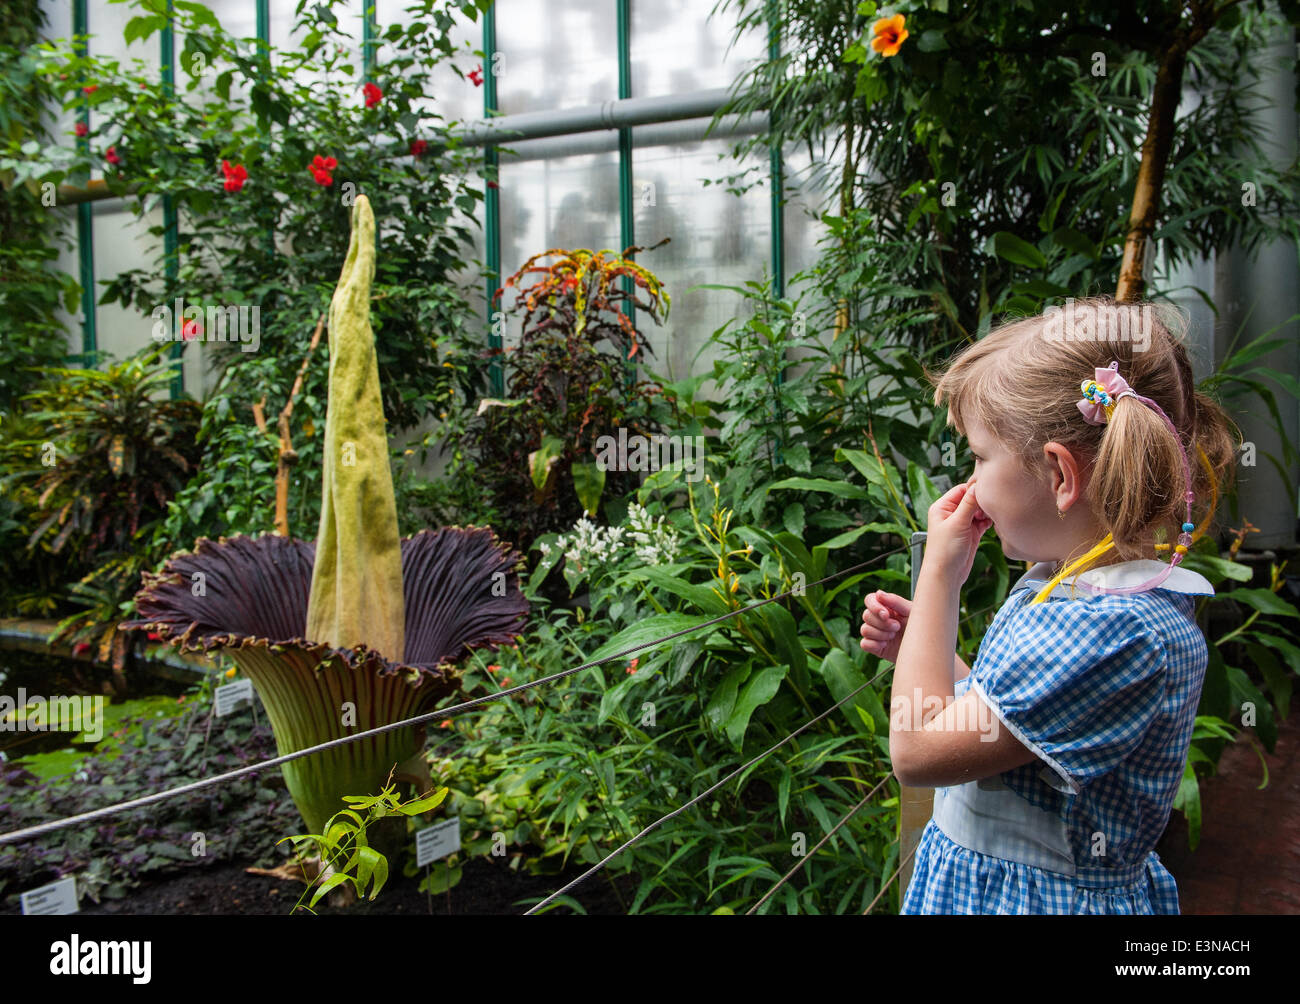 A titan arum (Amorphophallus titanum) came to bloom in Botanic garden in Liberec, Czech Republic on June 25, 2014. There are only few blooming plants of this species in the world. (CTK Photo/Radek Petrasek) Stock Photo